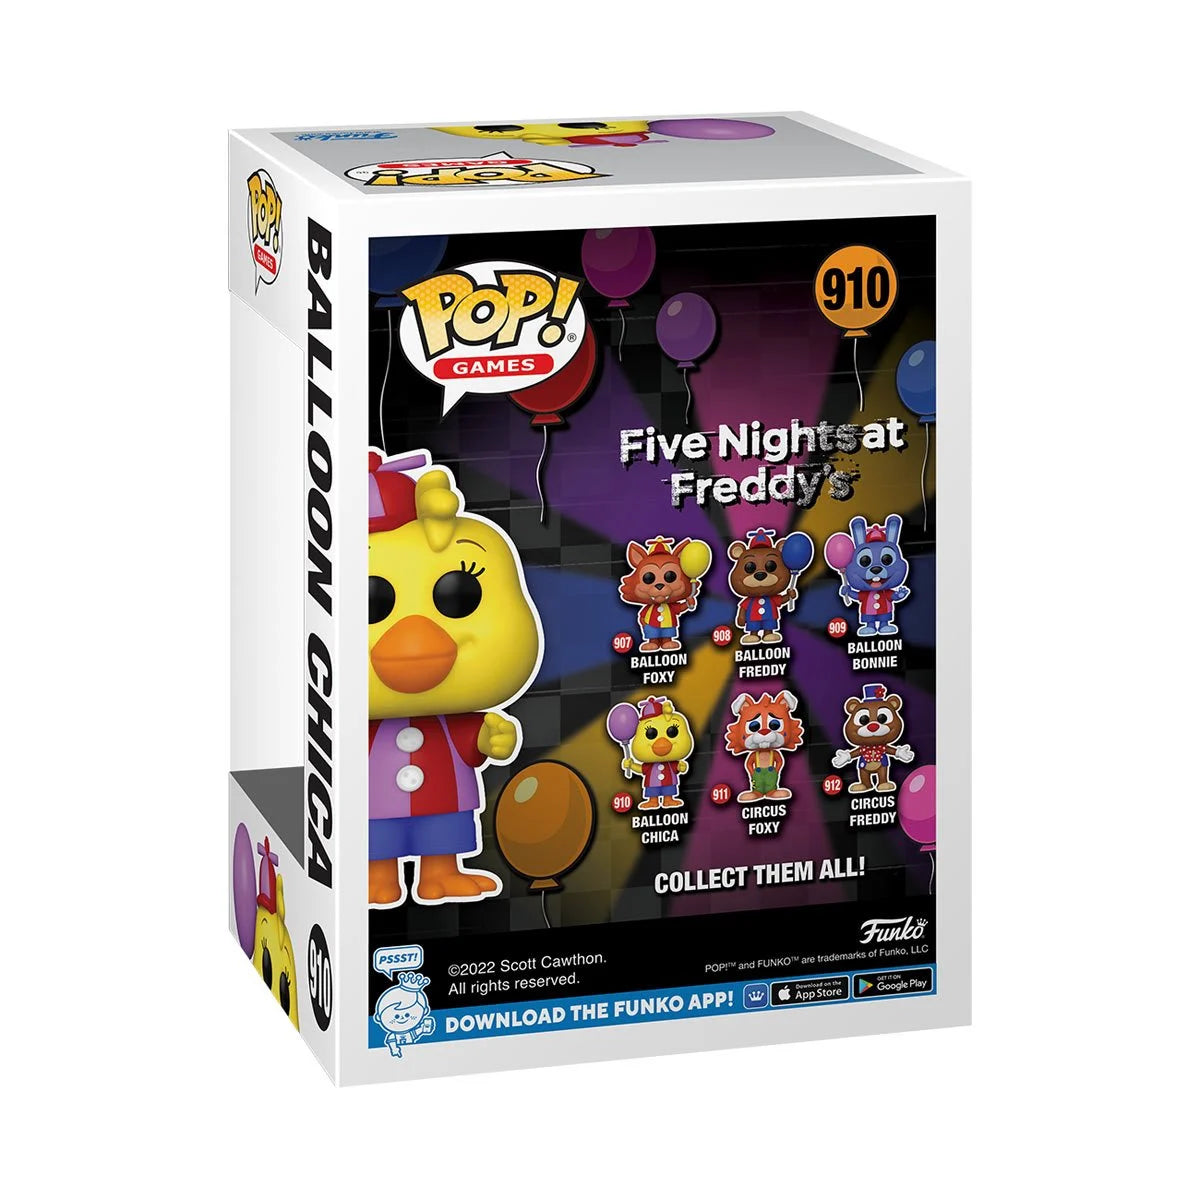 Balloon Chica Five Nights at Freddy's FUNKO POP! GAMES